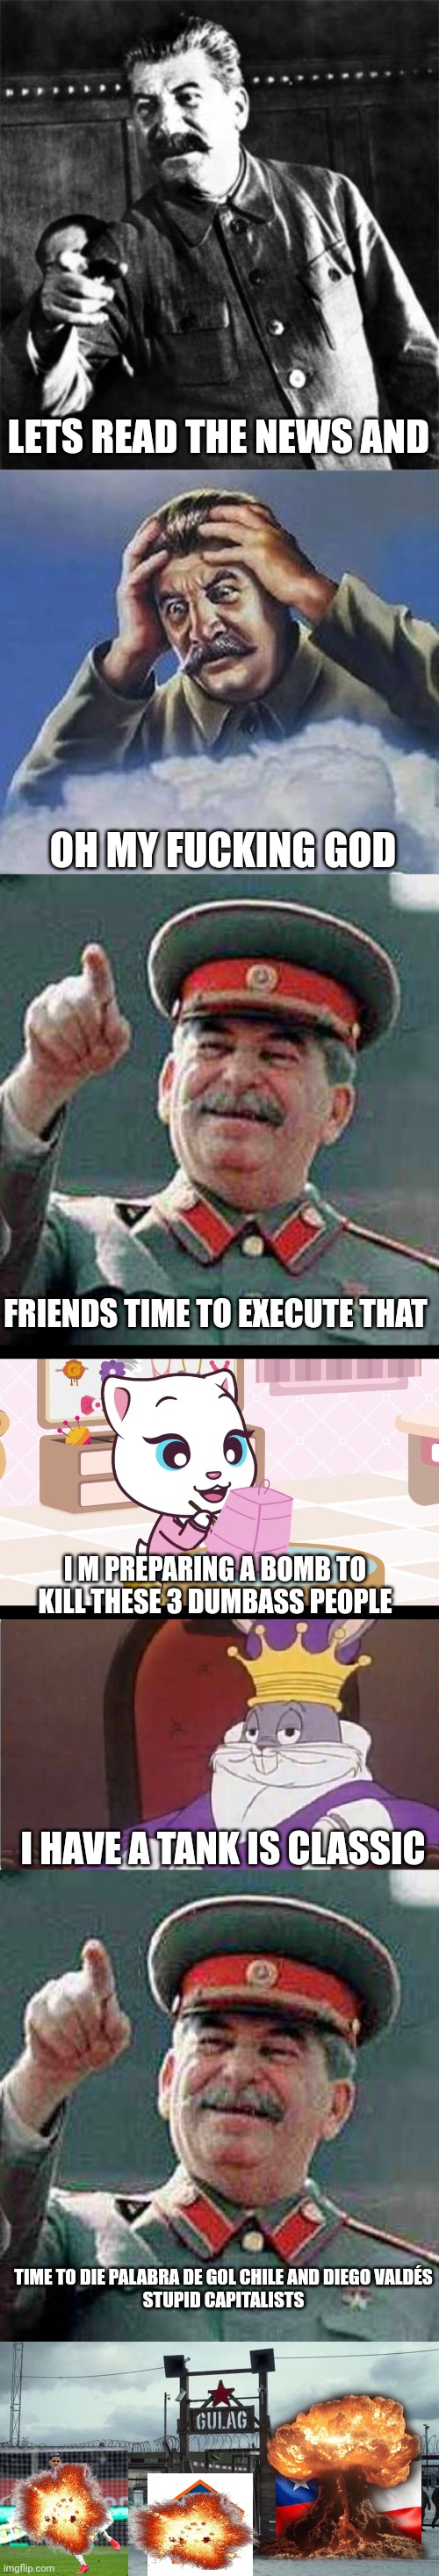 Stalin taking revenge on chile (for justacheemsdoge) | LETS READ THE NEWS AND; OH MY FUCKING GOD; FRIENDS TIME TO EXECUTE THAT; I M PREPARING A BOMB TO KILL THESE 3 DUMBASS PEOPLE; I HAVE A TANK IS CLASSIC; TIME TO DIE PALABRA DE GOL CHILE AND DIEGO VALDÉS
STUPID CAPITALISTS | image tagged in stalin,gulag,the stalin bois,joseph stalin,soviet union | made w/ Imgflip meme maker